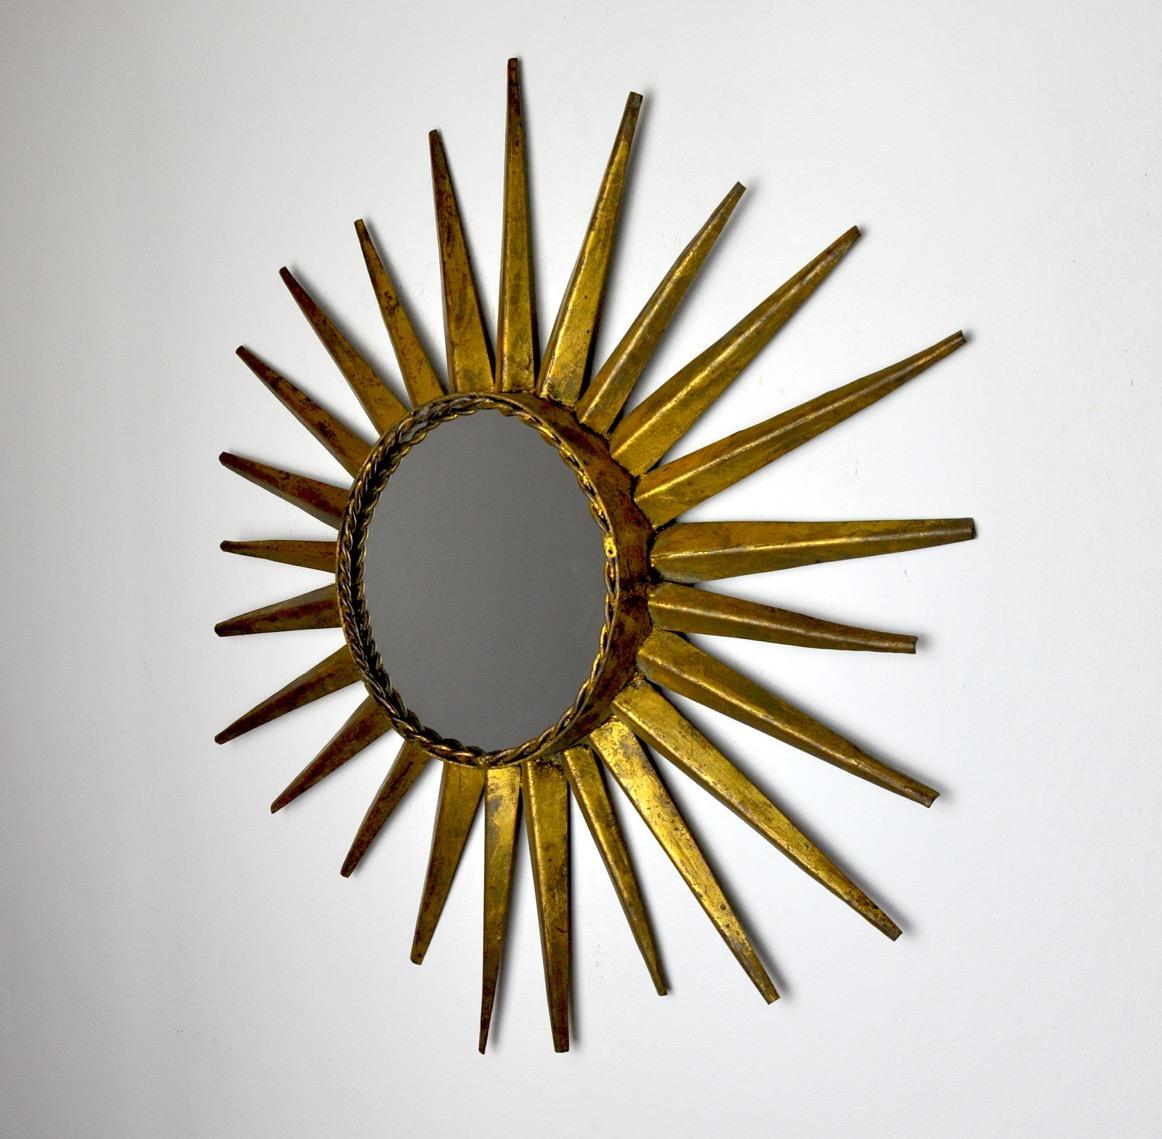 Superb and rare golden sun mirror with gold leaf designated and produced in italy in the 1970s.

Very beautiful forge work, superb dimensions, unique object that will decorate and bring a real design touch to your interior.

Ref: 777.